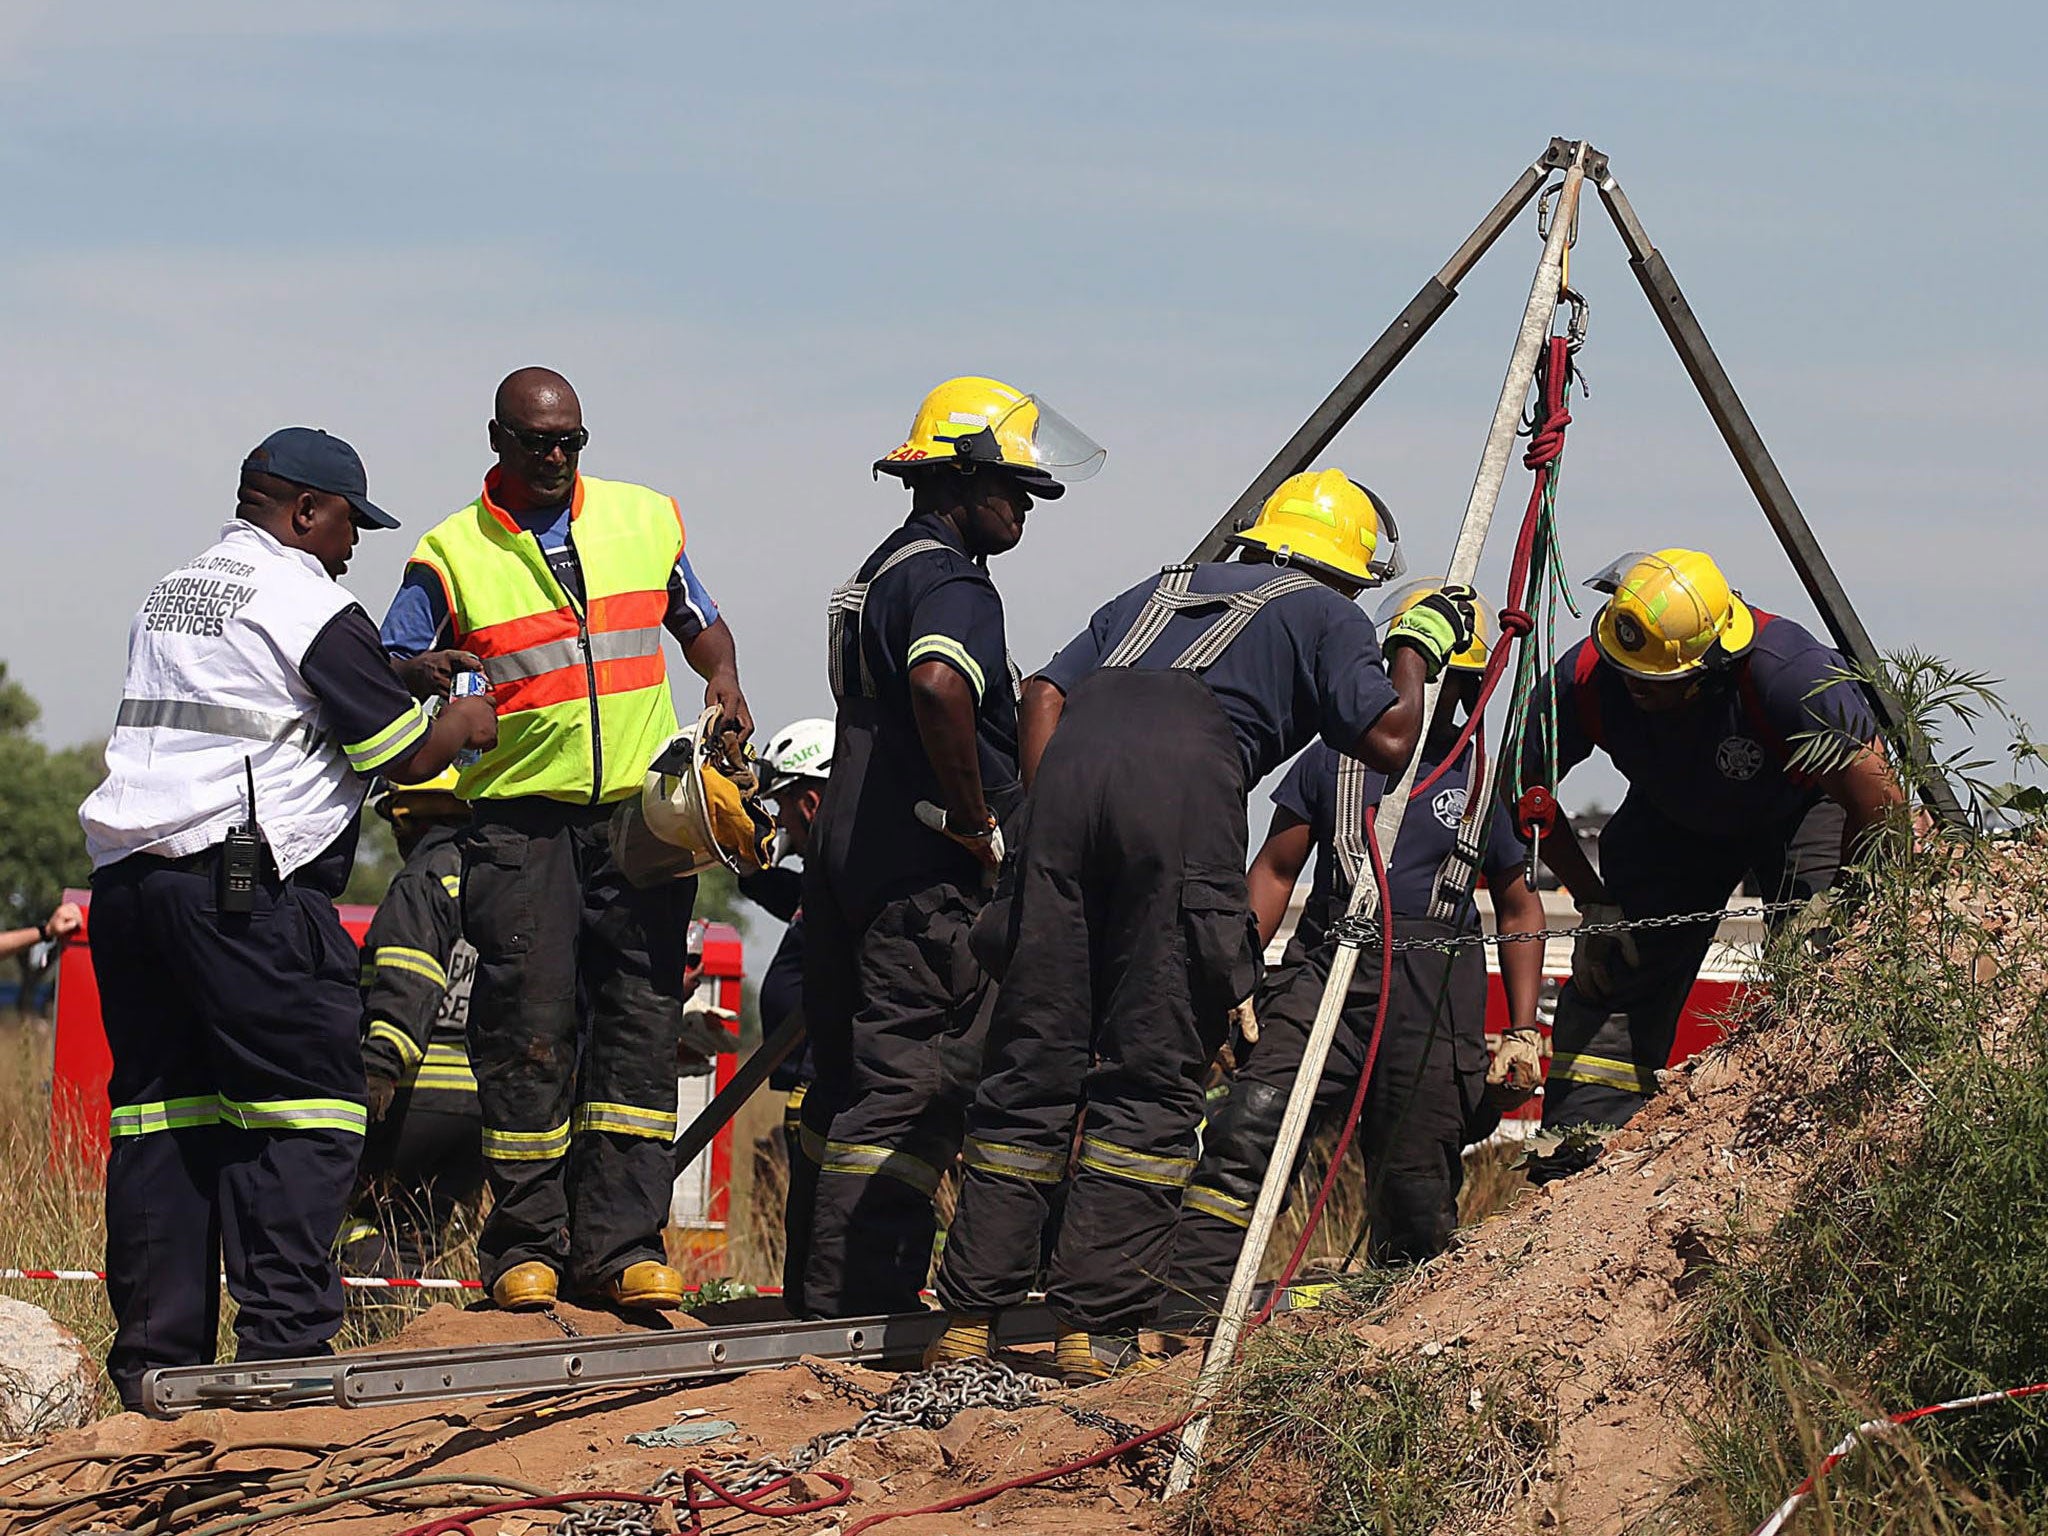 Rescue services and emergency personnel try to free miners trapped underground in Benoni, east of Johannesburg, South Africa, 16 February 2014